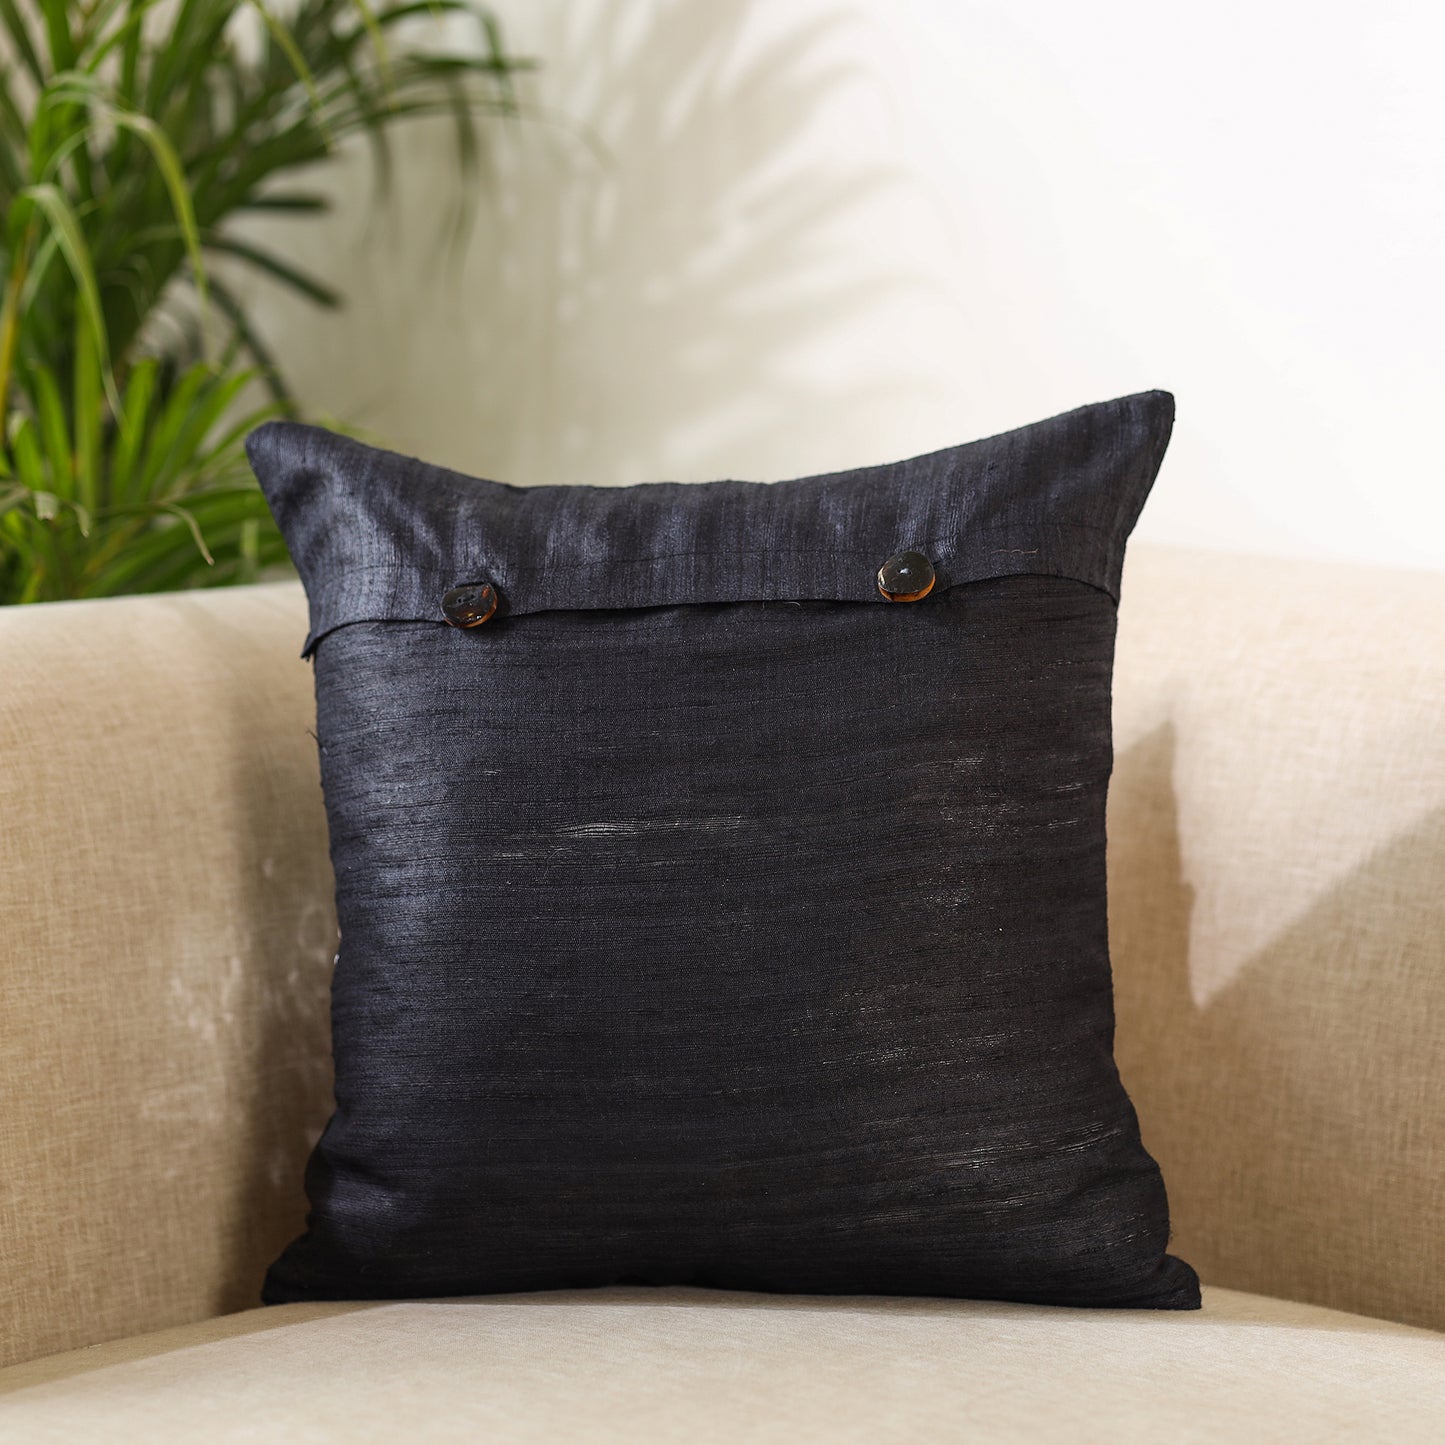 Sequin Cushion Cover